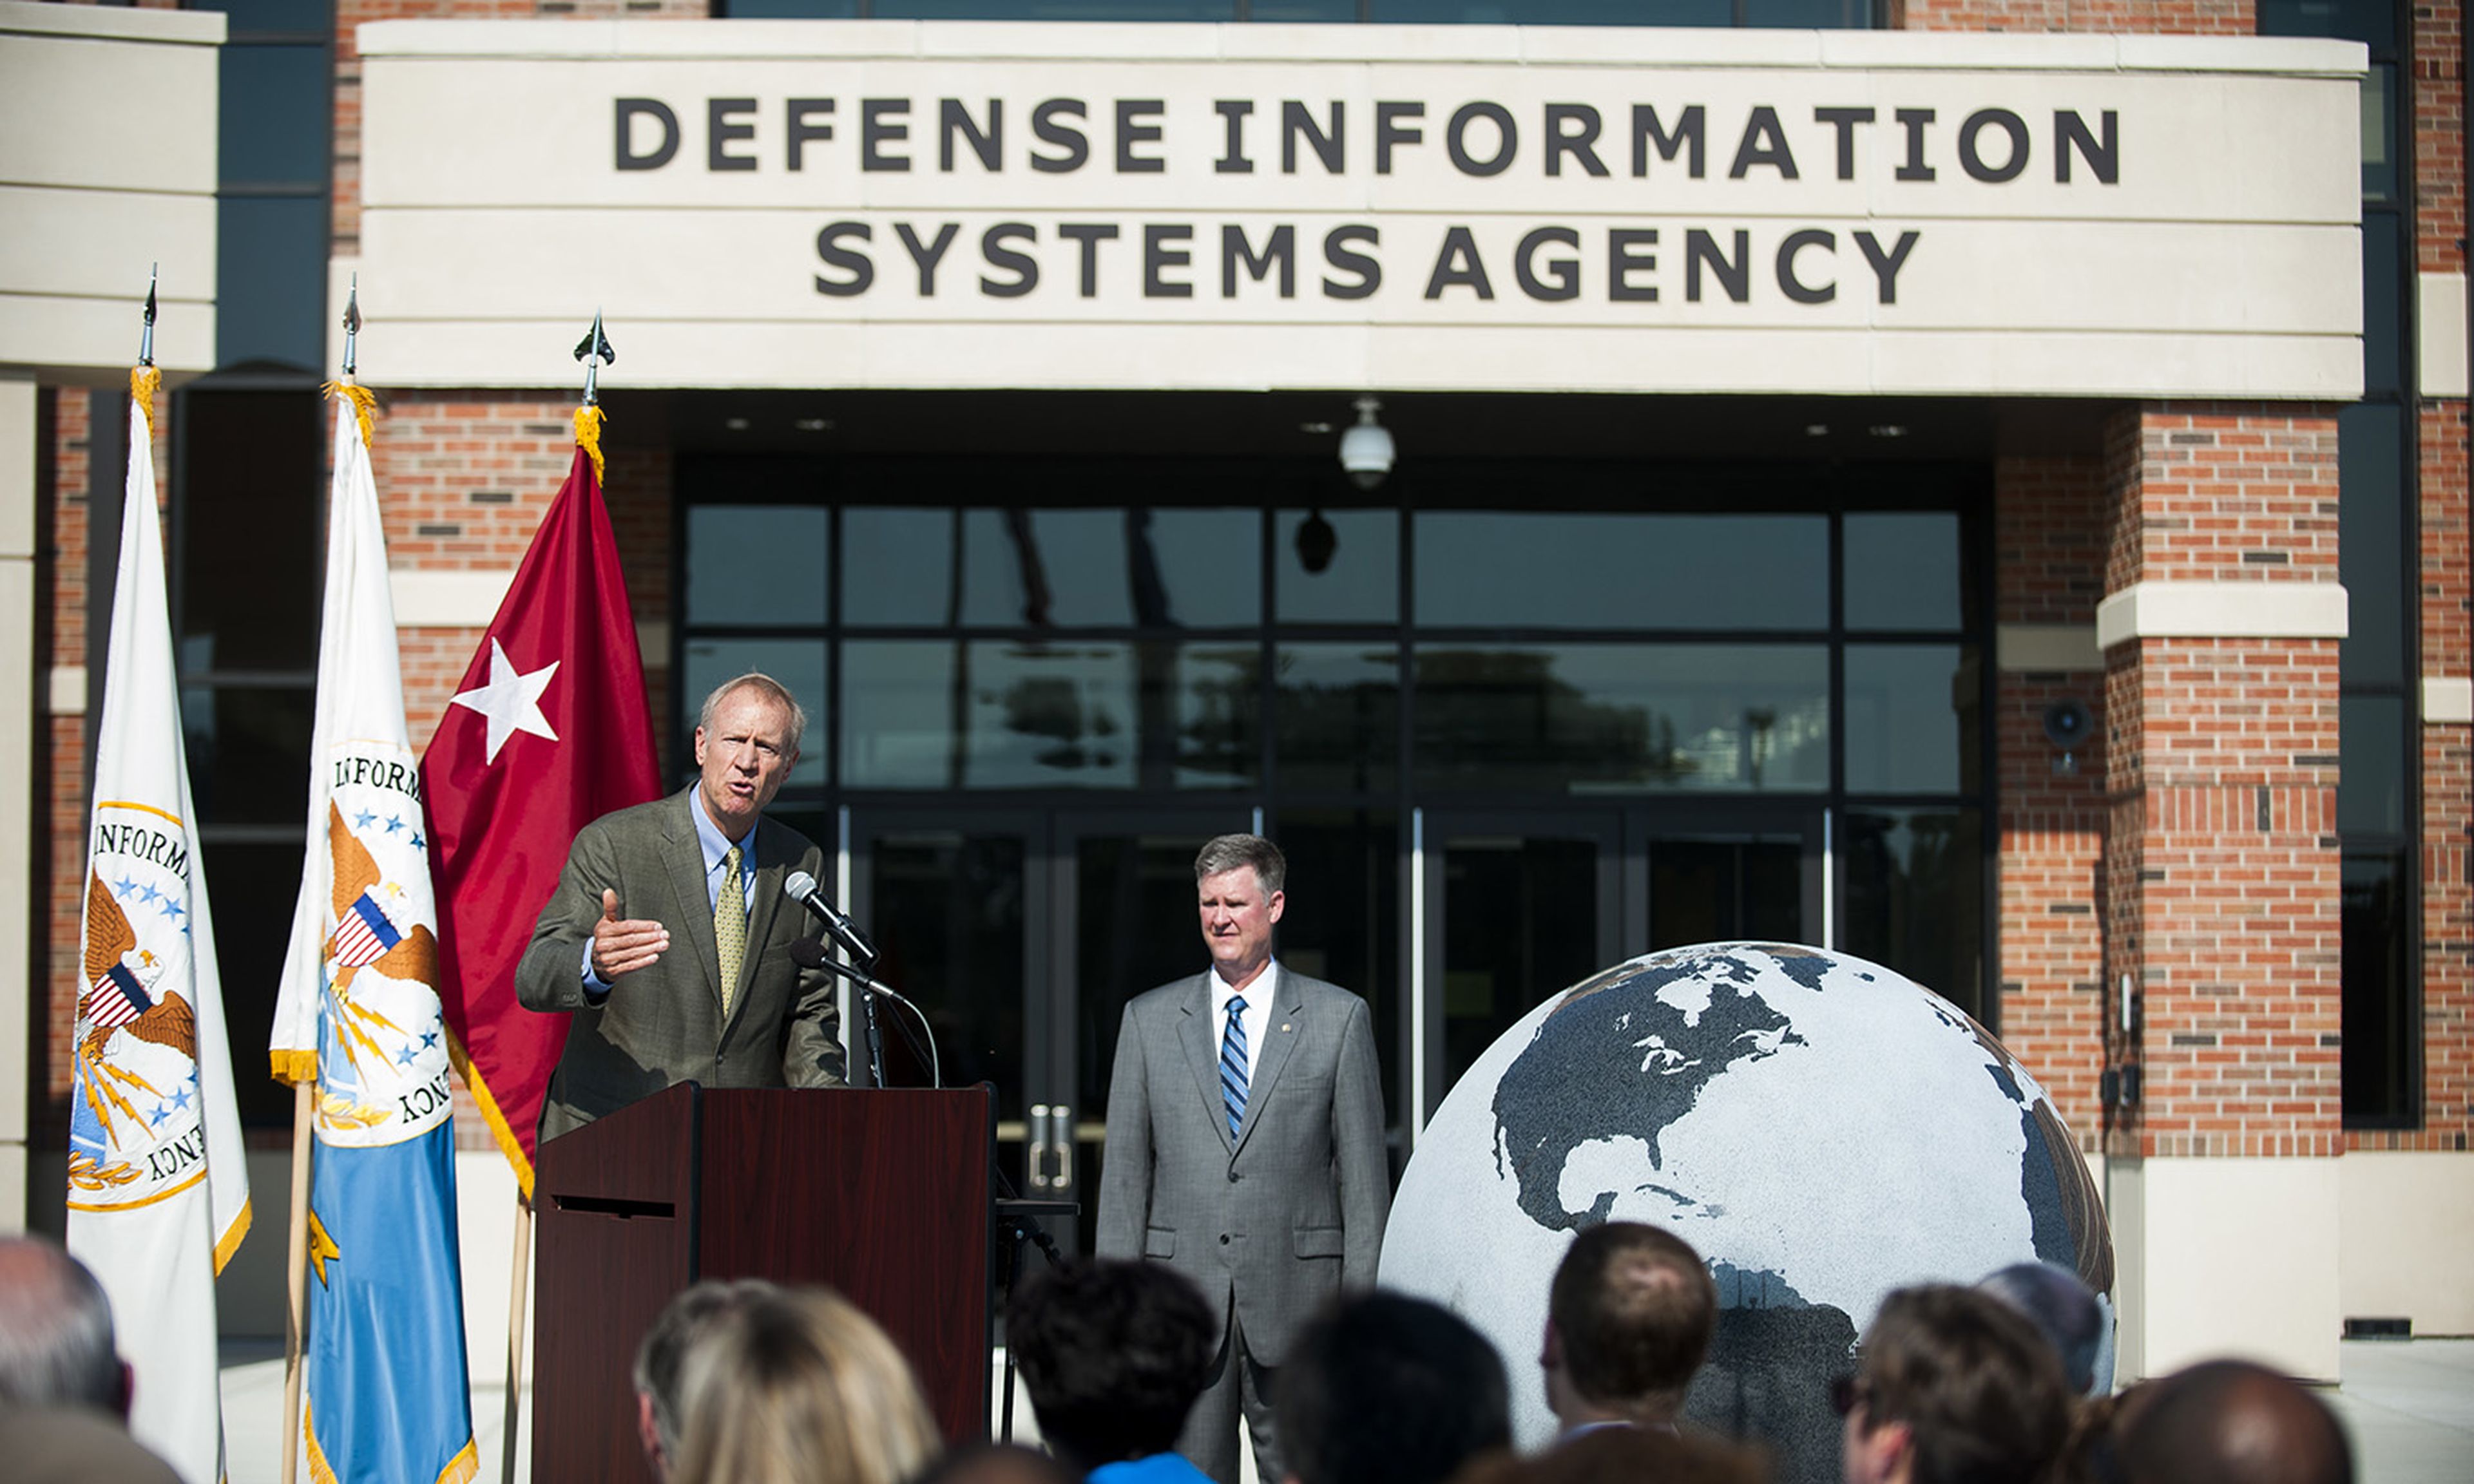 The Defense Information Systems Agency and Booz Allen Hamilton are partnering on a $6.8 million pilot to develop a new security model based on zero trust principles. Pictured: Then-Illinois Gov. Bruce Rauner delivers a speech during a ribbon-cutting ceremony for DISA&#8217;s new compound at Scott Air Force Base, Ill., Aug. 11, 2016. (Staff Sgt. Cla...